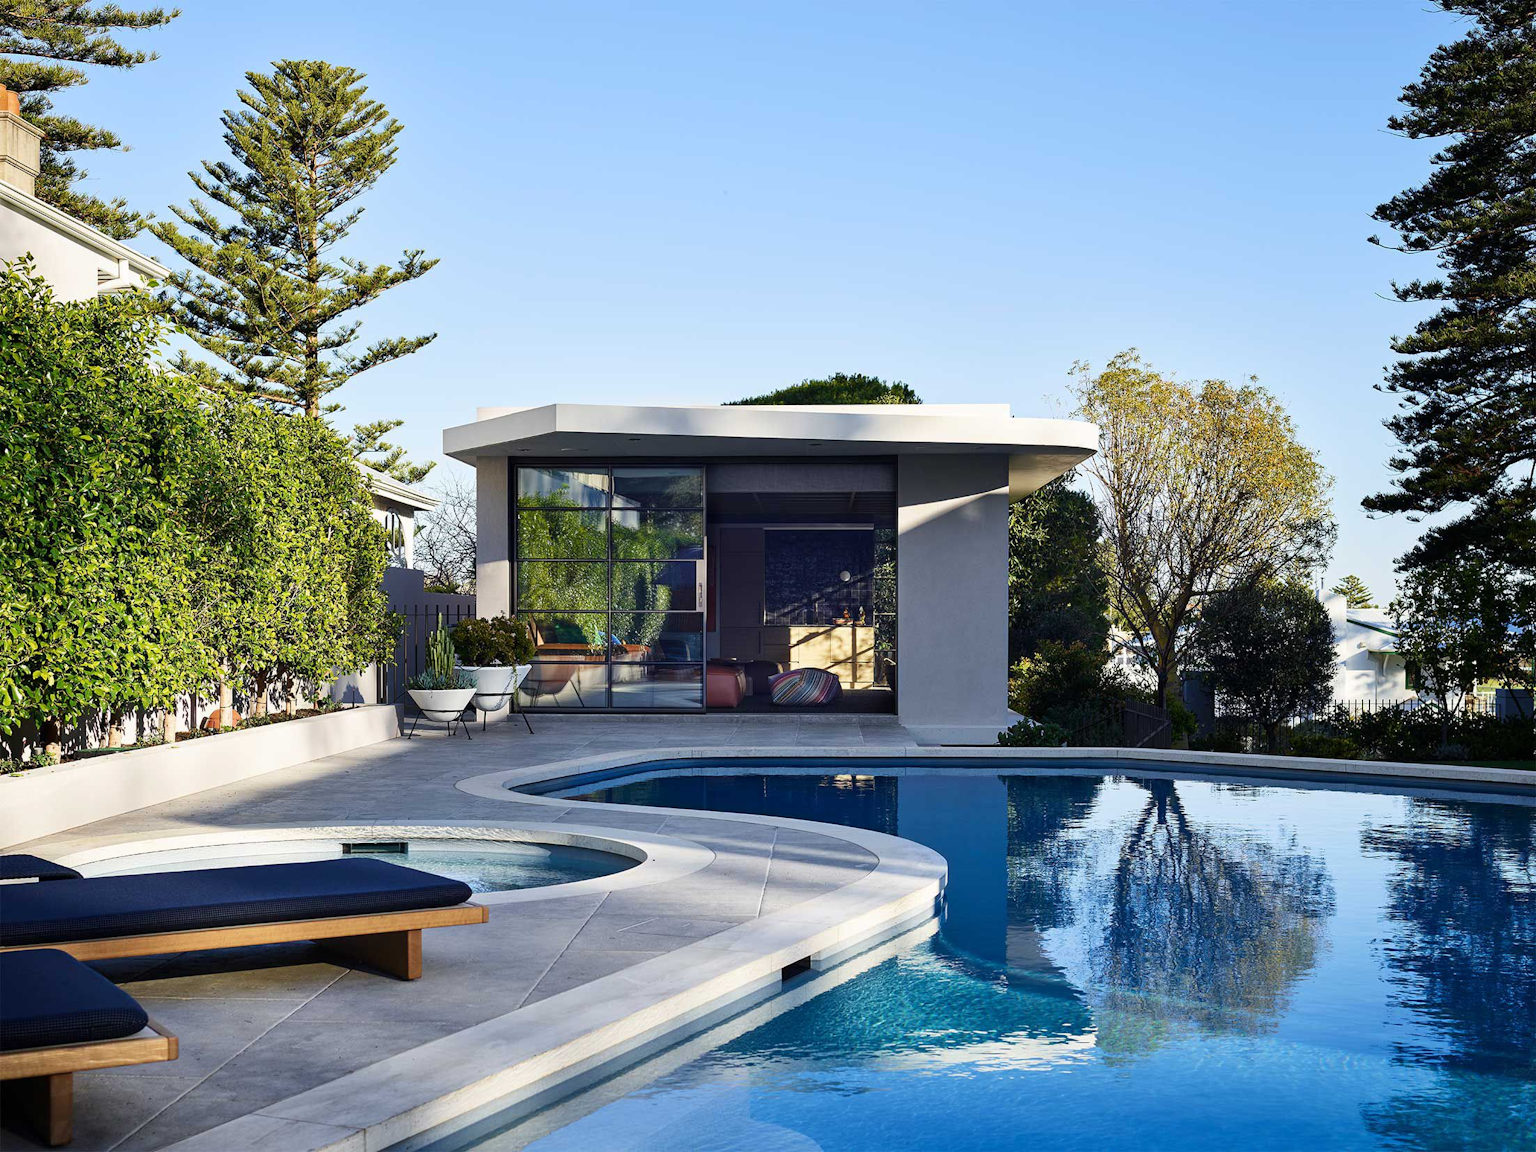 POOL_PAVING__CHALFORD_LIMESTONE__DESIGN_BY_TIM_WRIGHT_ARCHITECT_EcoOutdoor_1683276944264479